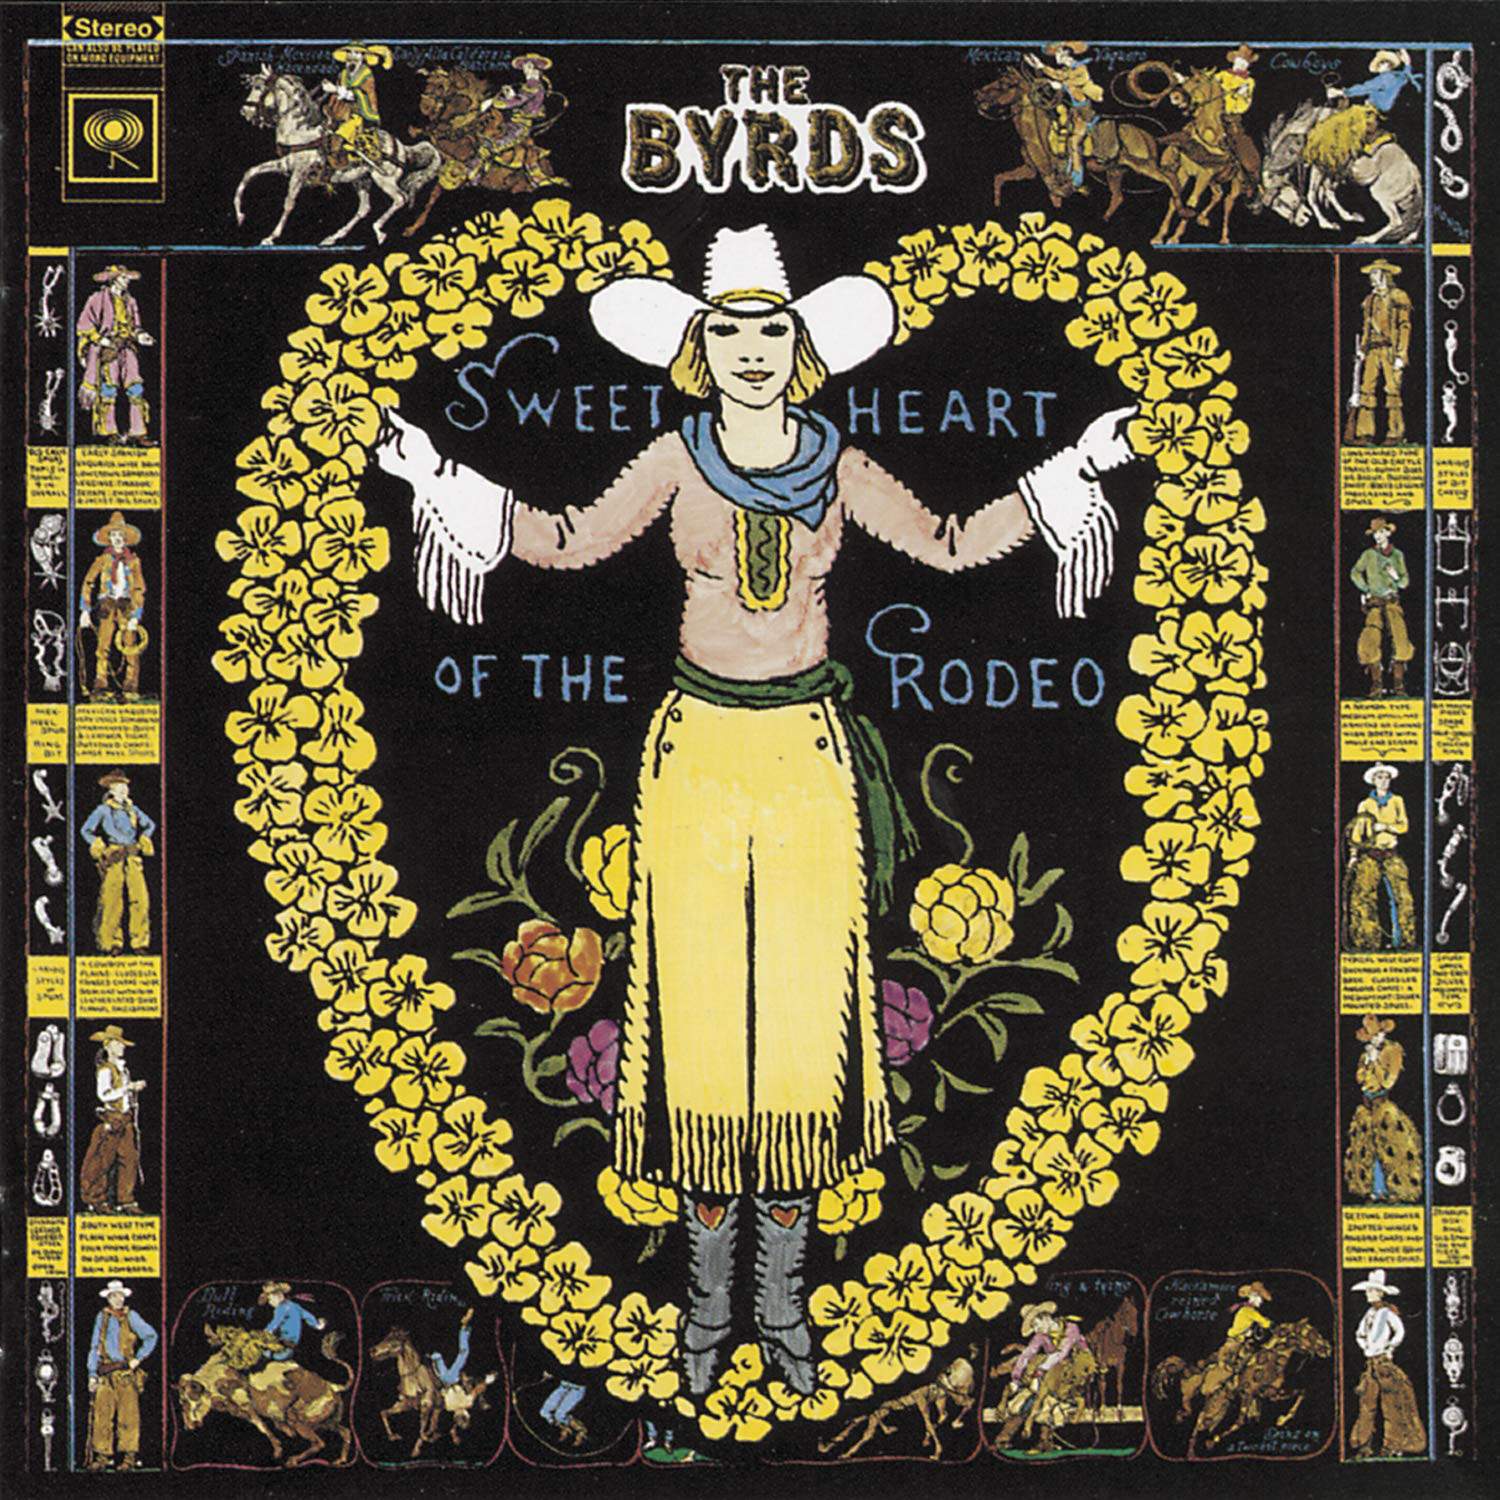 133 The Byrds – Sweetheart Of The Rodeo